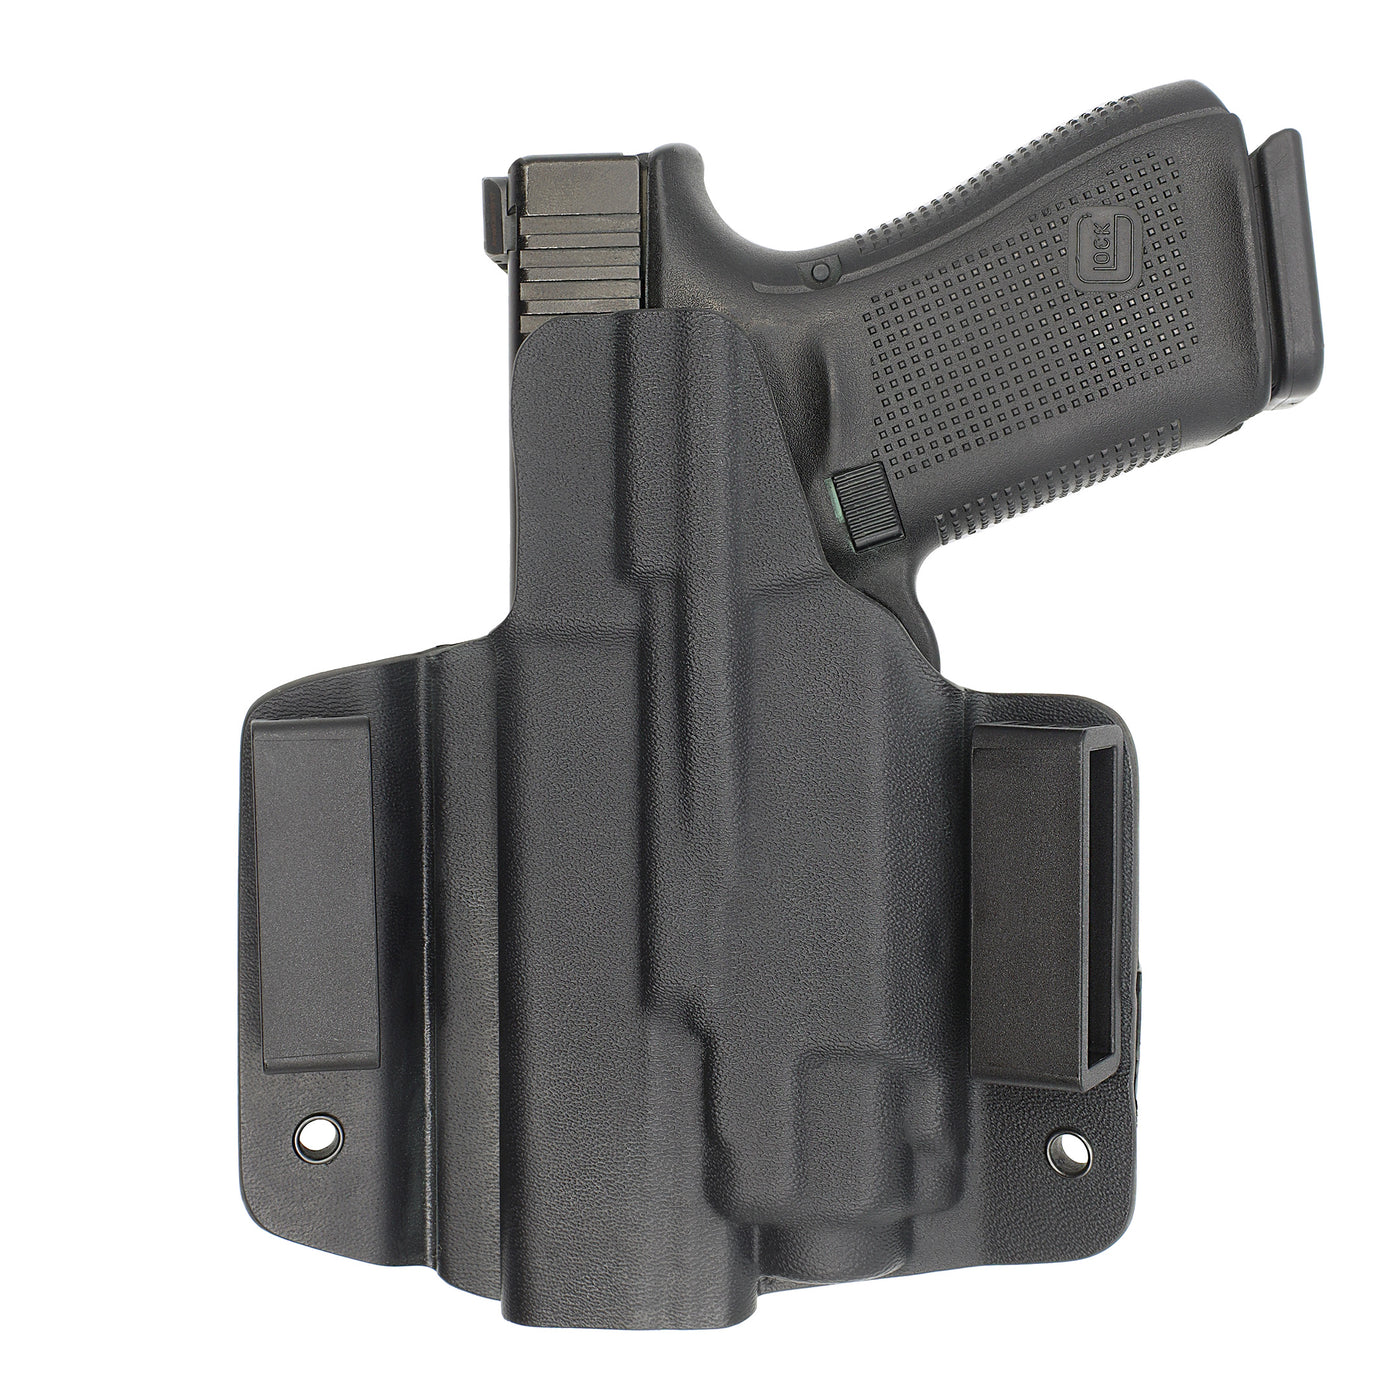 C&G Holsters custom OWB Tactical Glock 17/19 streamlight TLR8 holstered back view